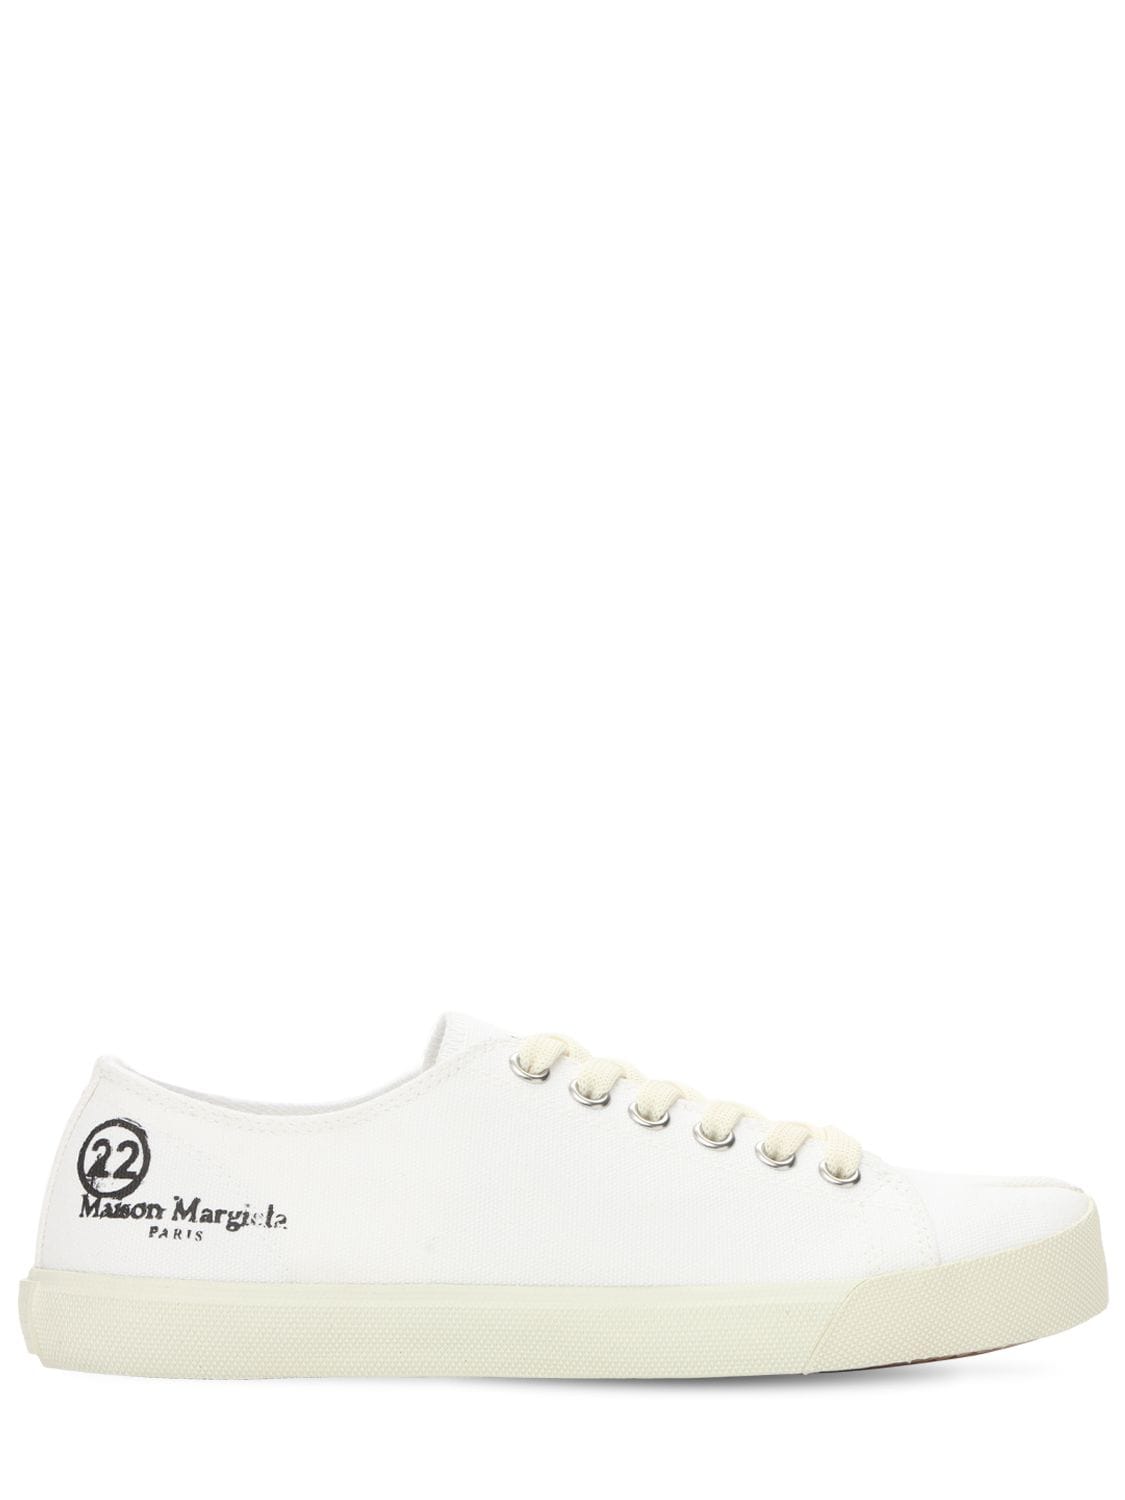 Maison Margiela 20mm Vandal Canvas Sneakers In White